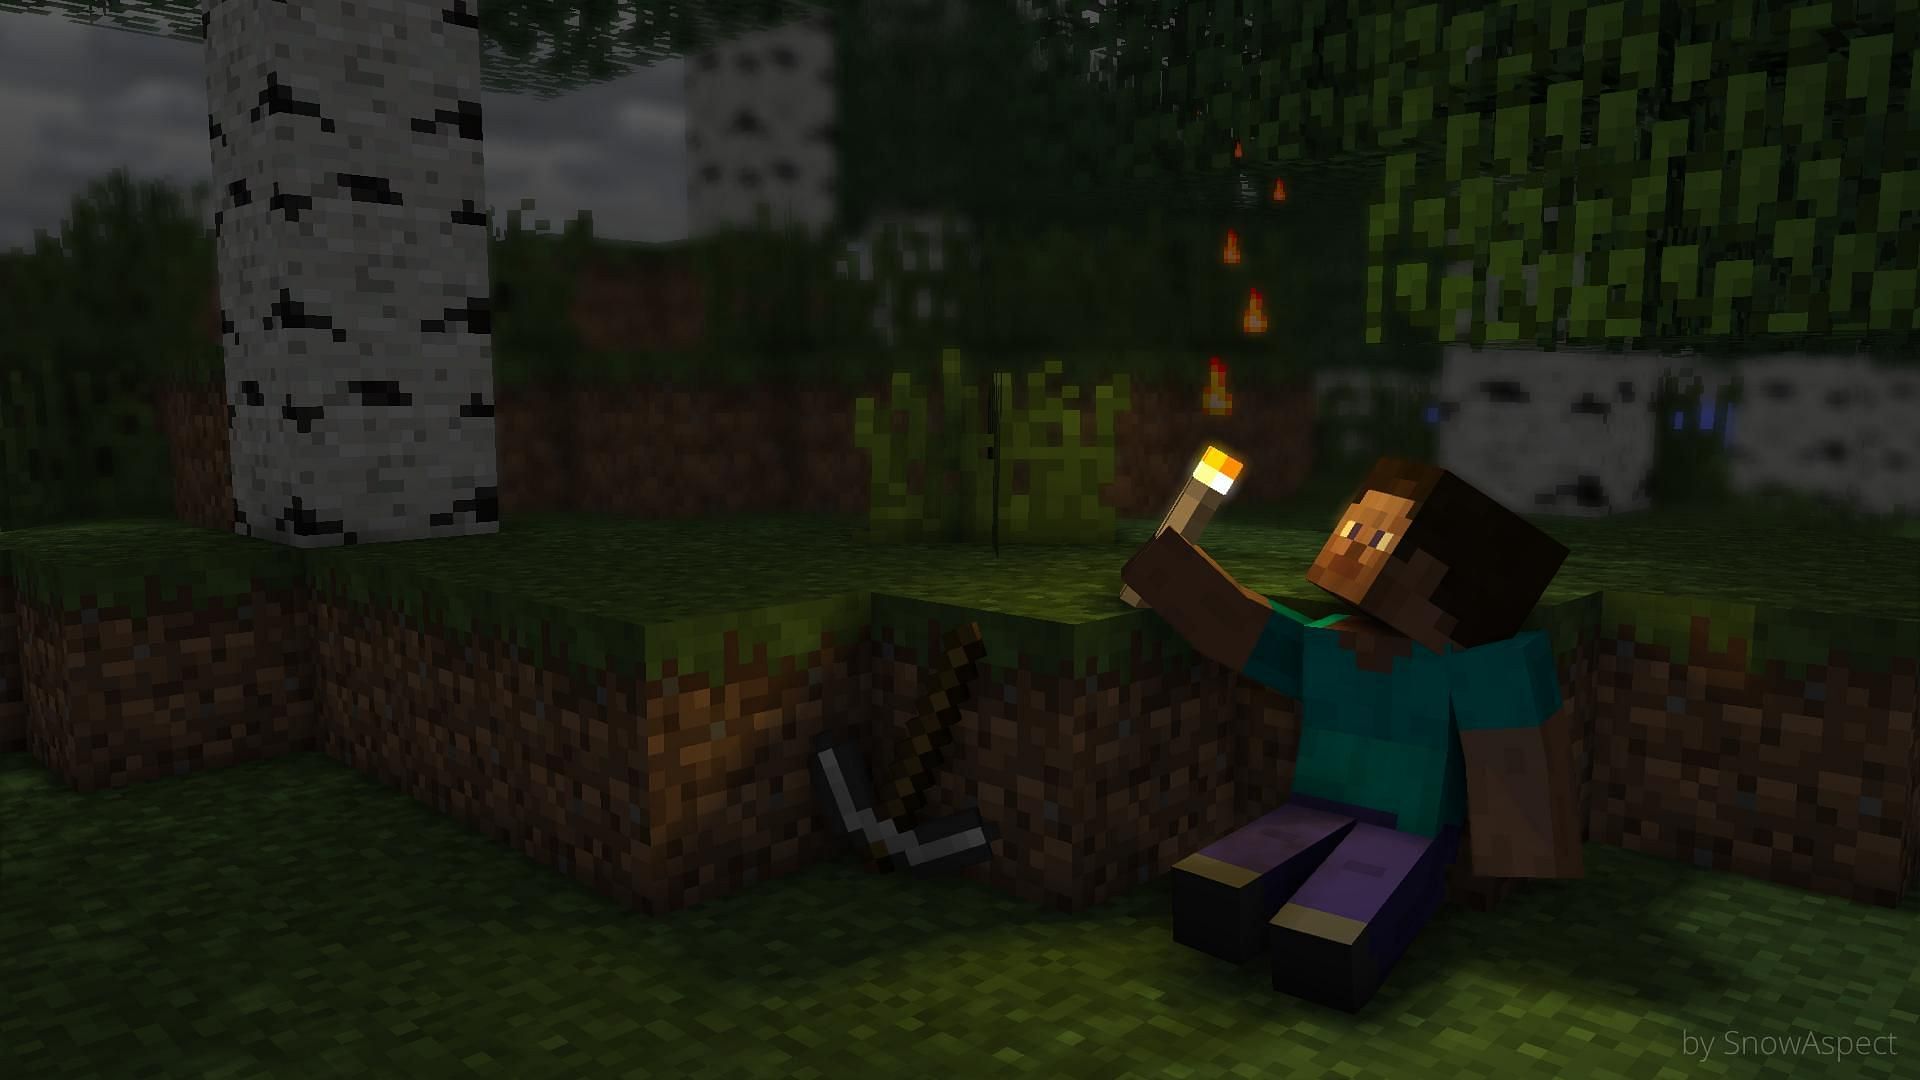 Without mods or add-ons, torches offer no light when held in Minecraft (Image via Mojang)